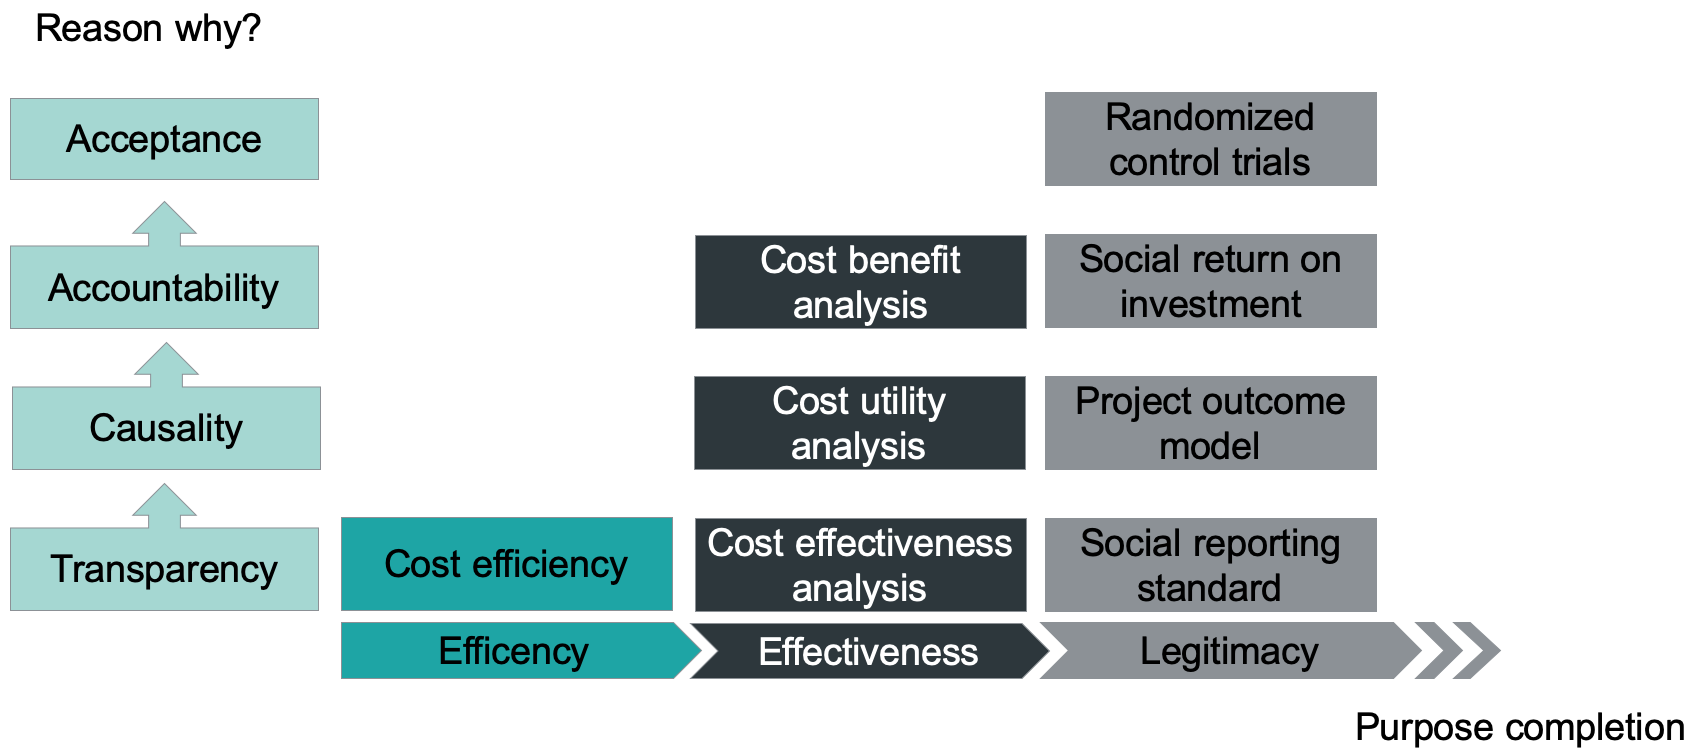 Graph: Impact measurement tools and  their reasons: transparency: cost efficiency, cost effectiveness analysis, social reporting standard. Causality: cost utility analysis, project outcome model. Accountability: cost benefit analysis, social ROI. Acceptance: randomized control trials.